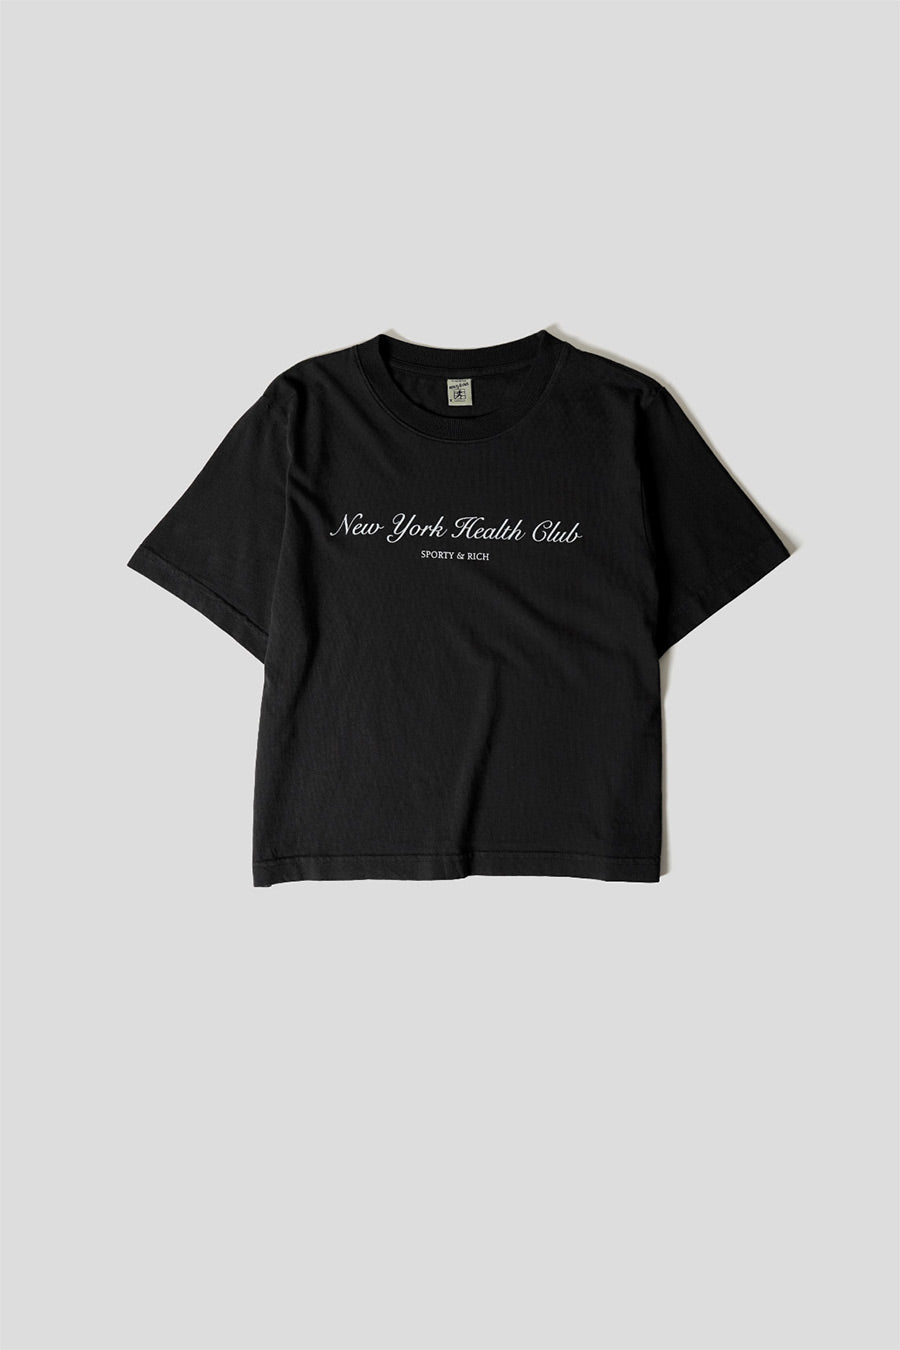 Sporty & Rich - NY HEALTH CLUB CROPPED T-SHIRT BLACK - LE LABO STORE